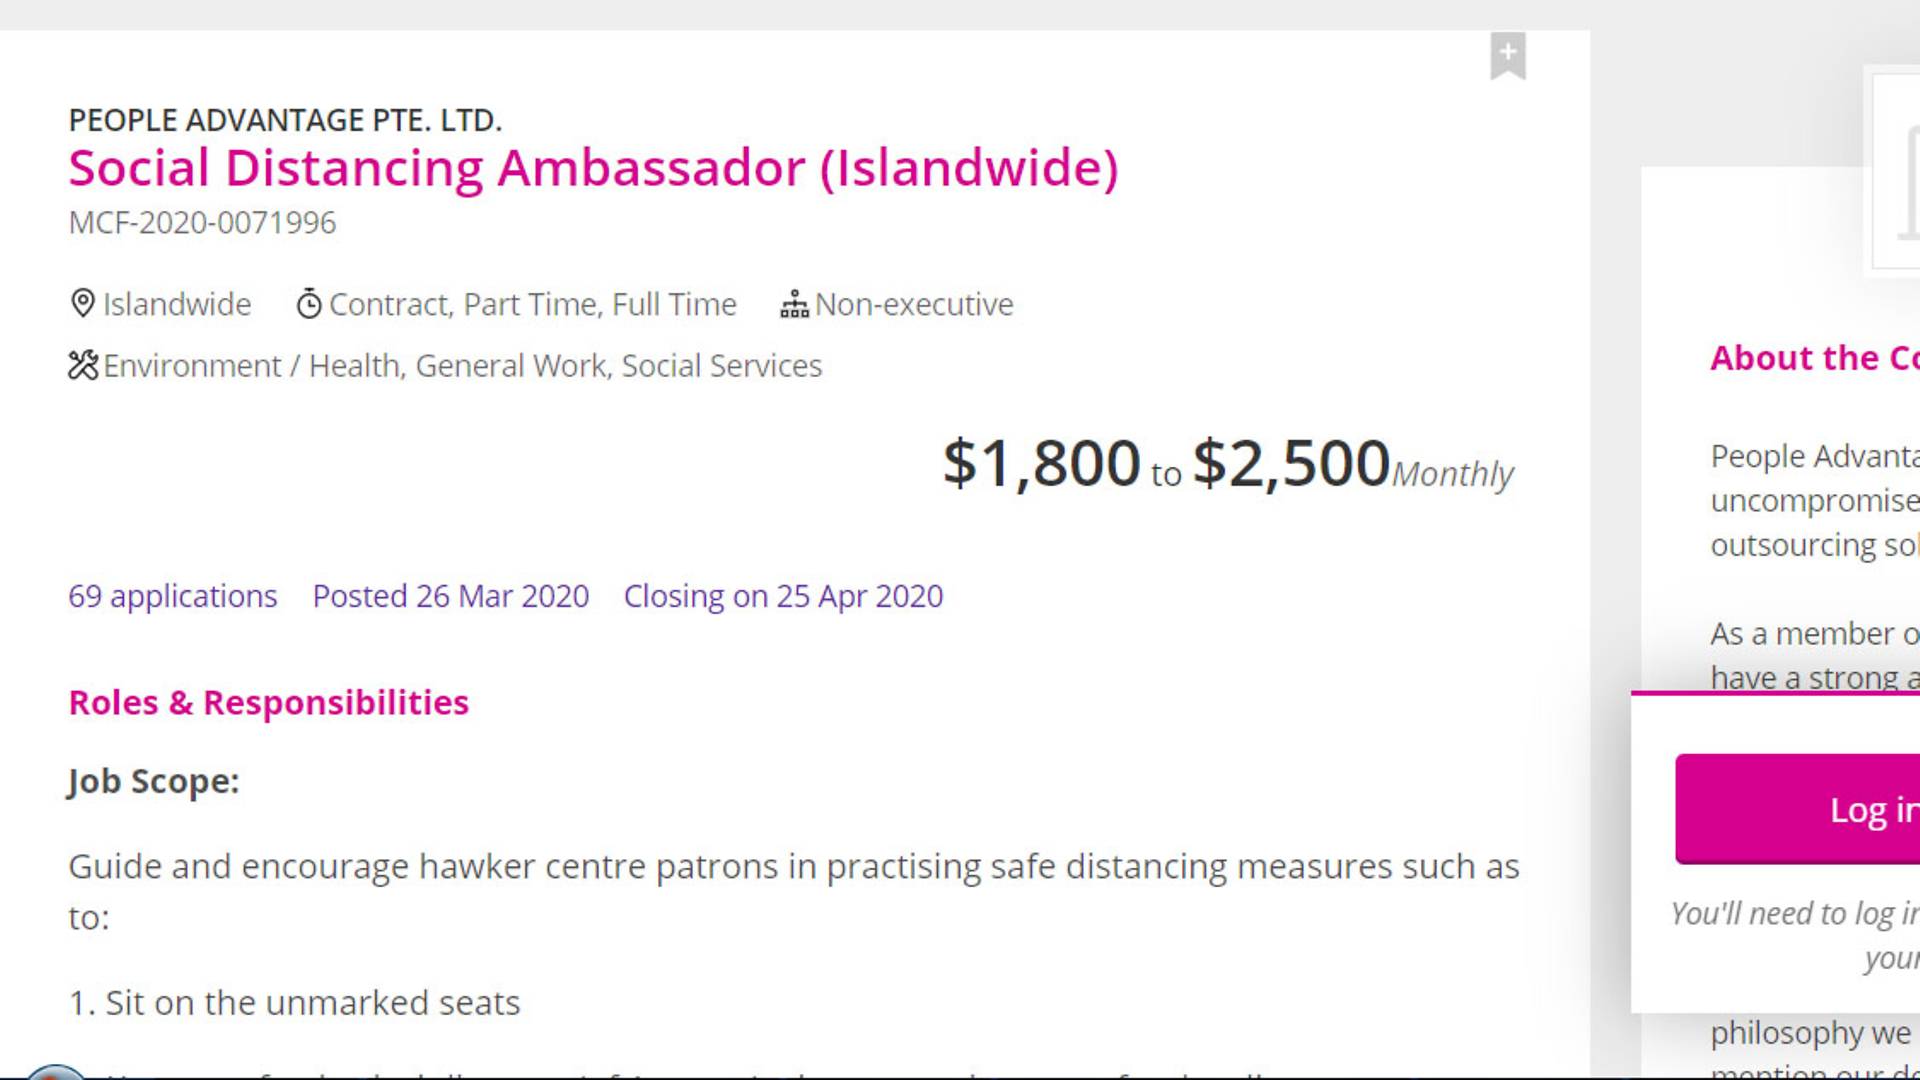 You Can Get Paid Up To Rm 7,624 To Be A 'Social Distancing Ambassador' In Sg Hawker Centres - World Of Buzz 3